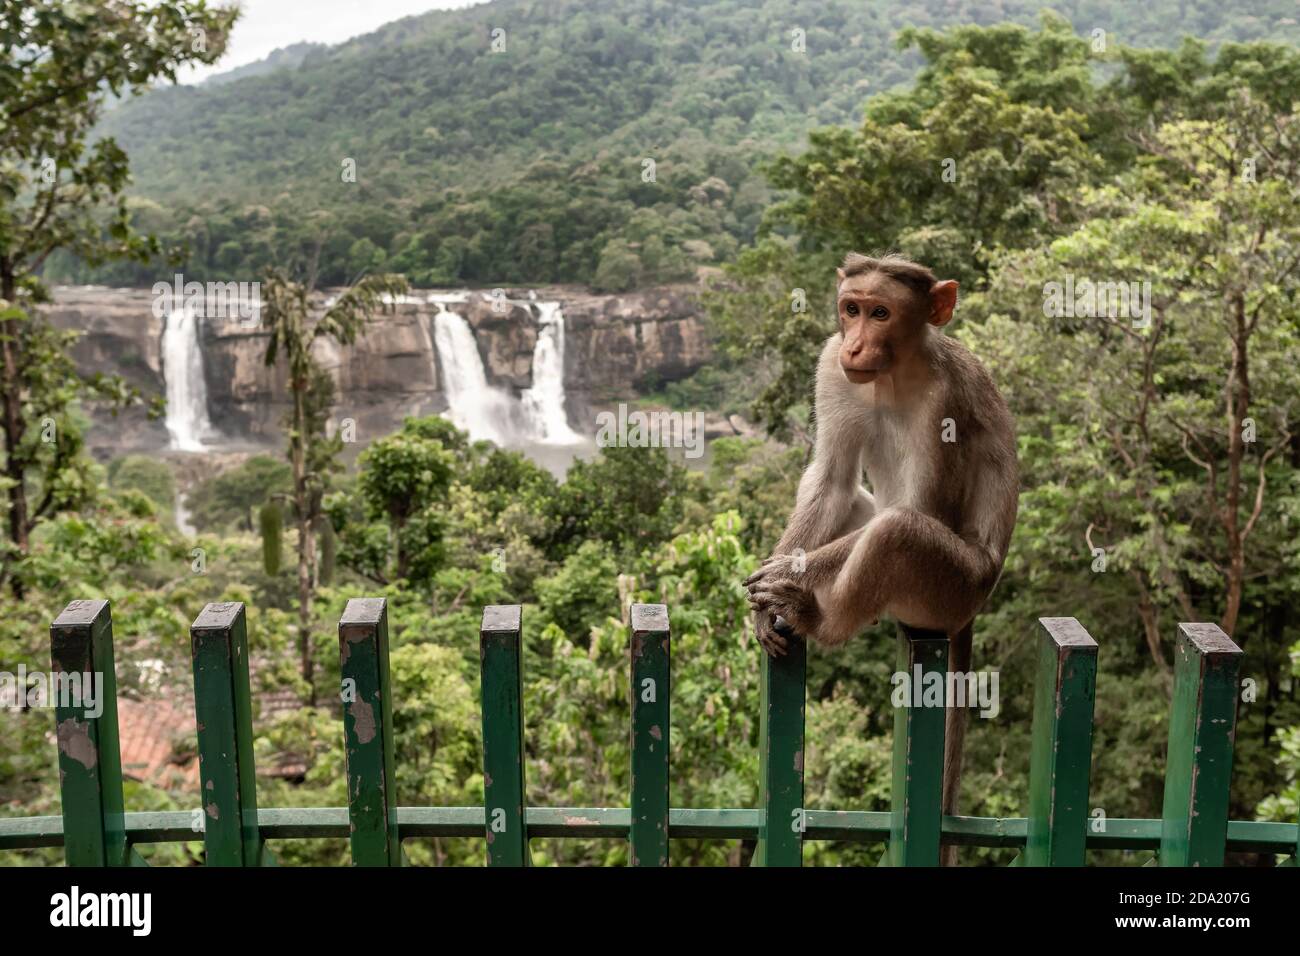 Wild macaque monkey with Athirappilly waterfalls at background Stock Photo